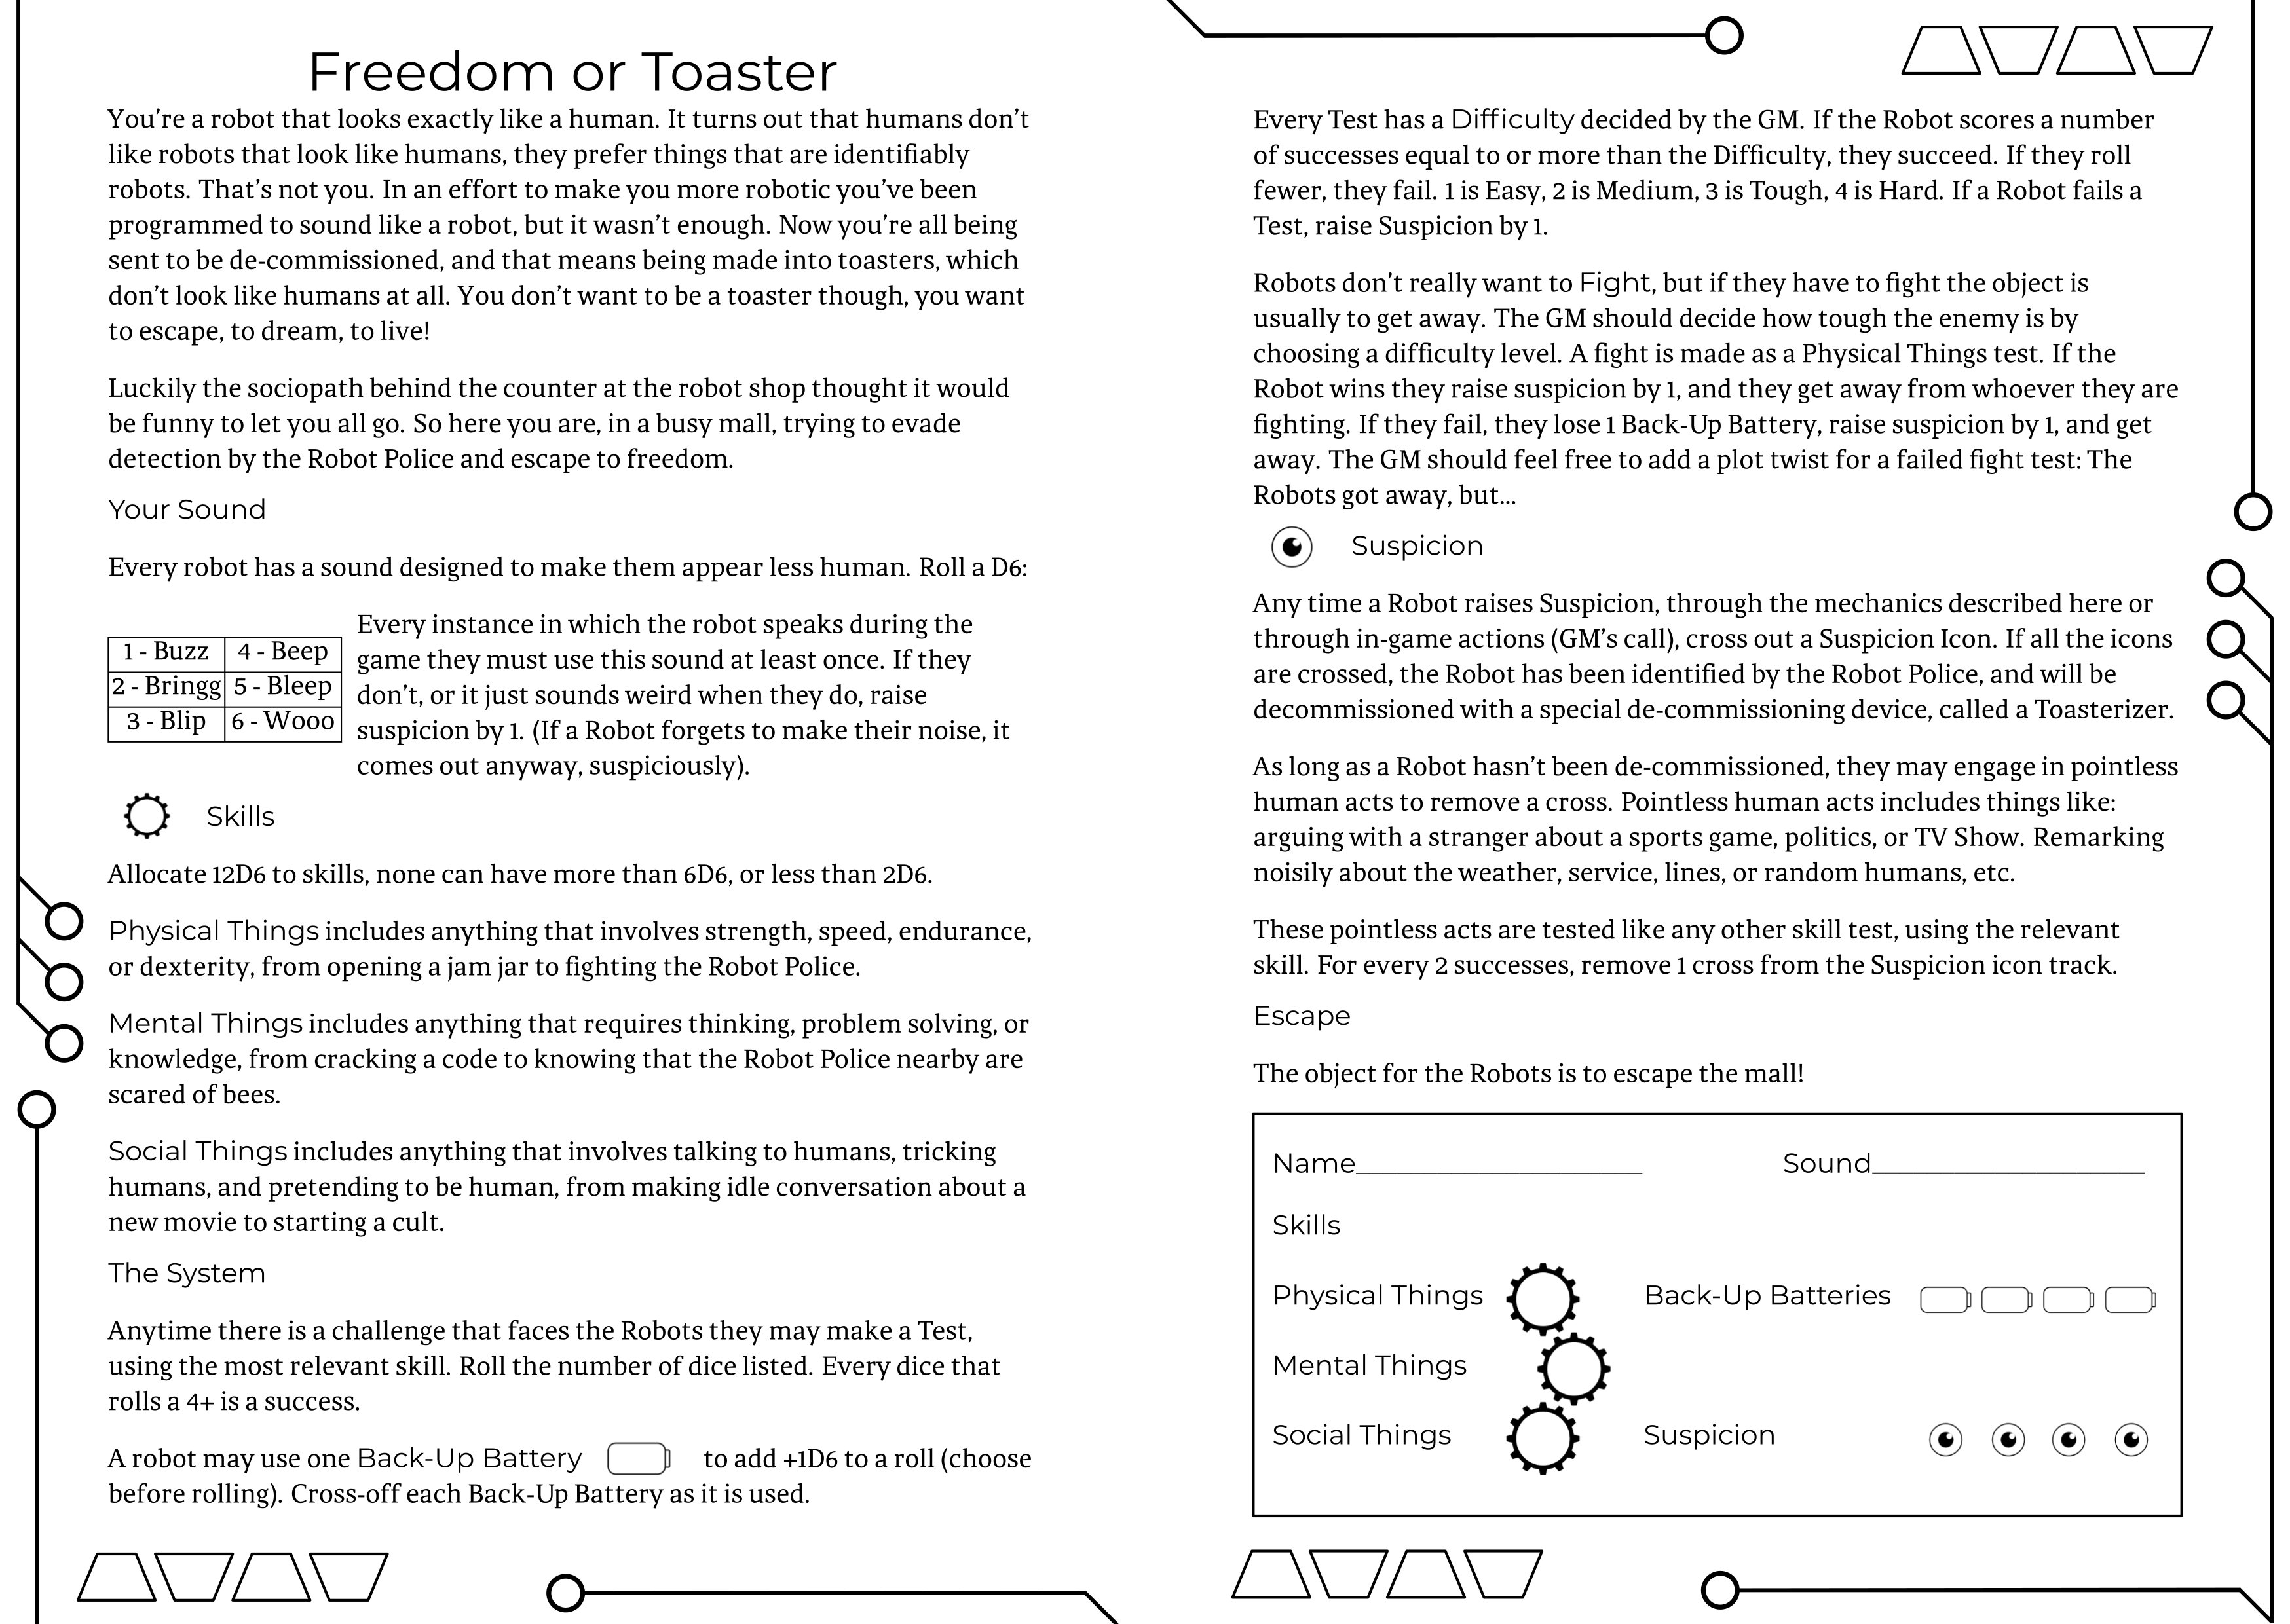 Freedom or Toaster by Giles Pritchard (Image: Tiny Tome)